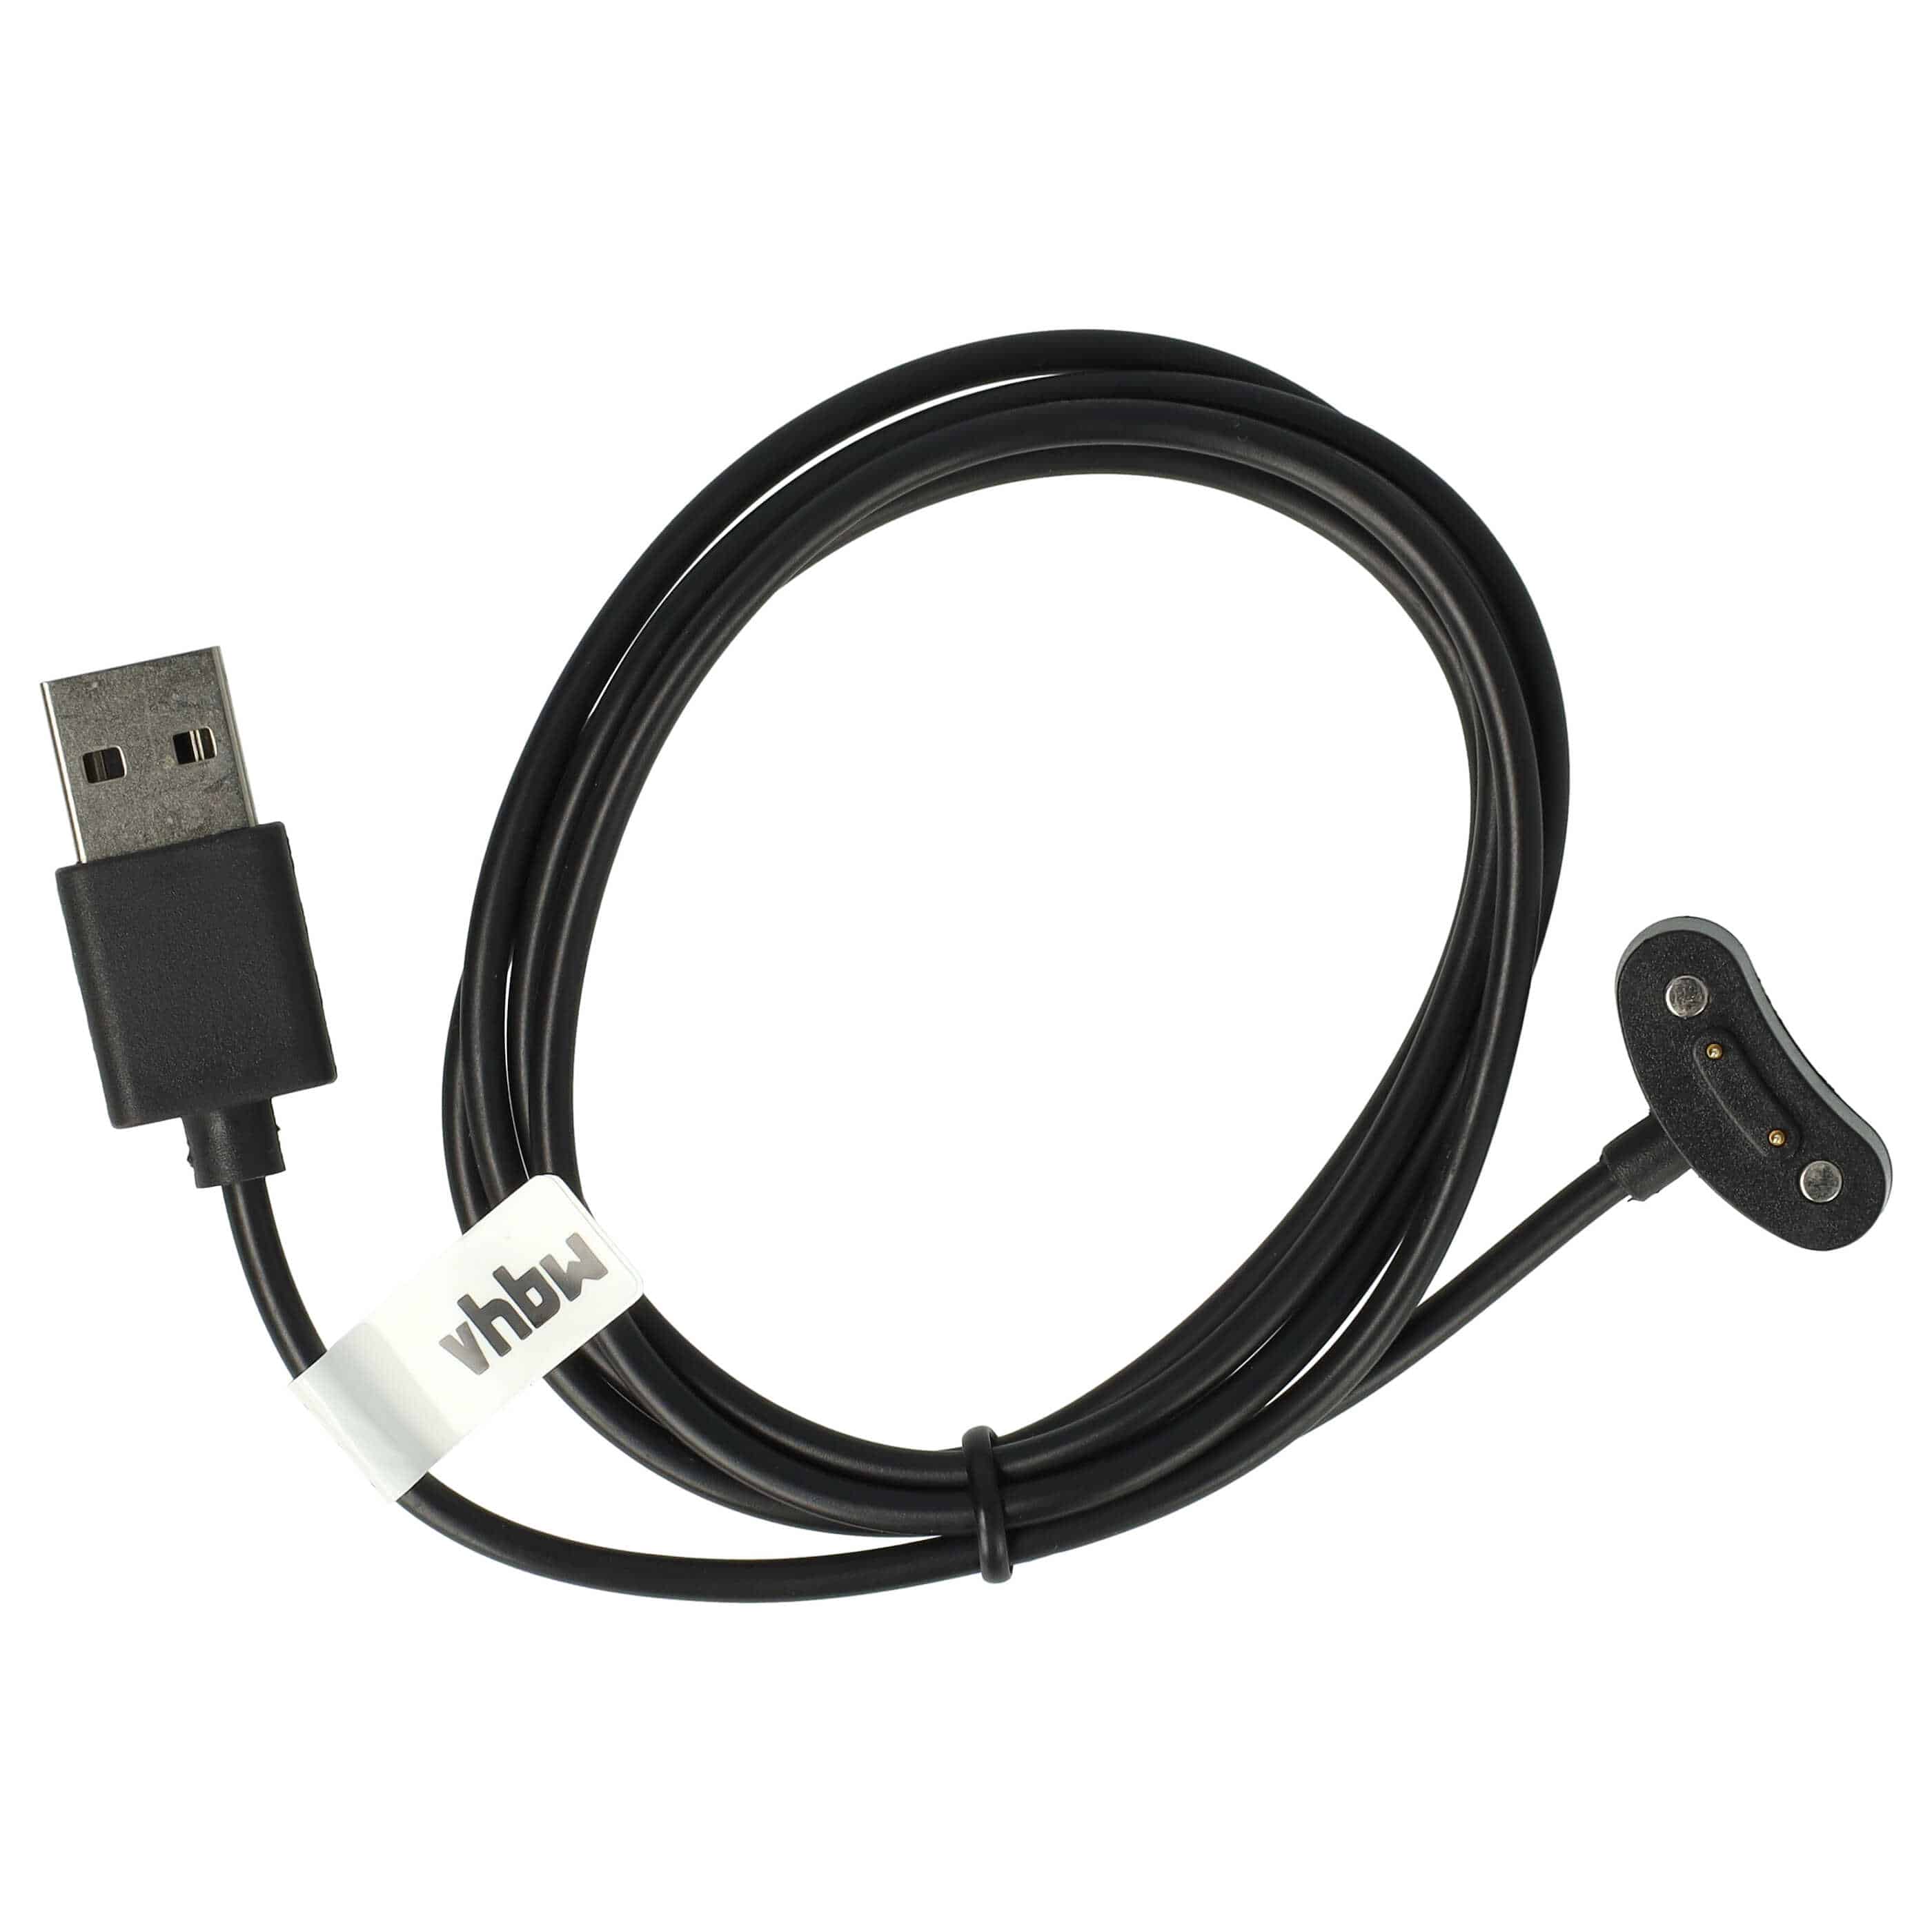 Charging Cable suitable for Mobvoi TicWatch E3 Fitness Tracker - USB A Cable, 100cm, black